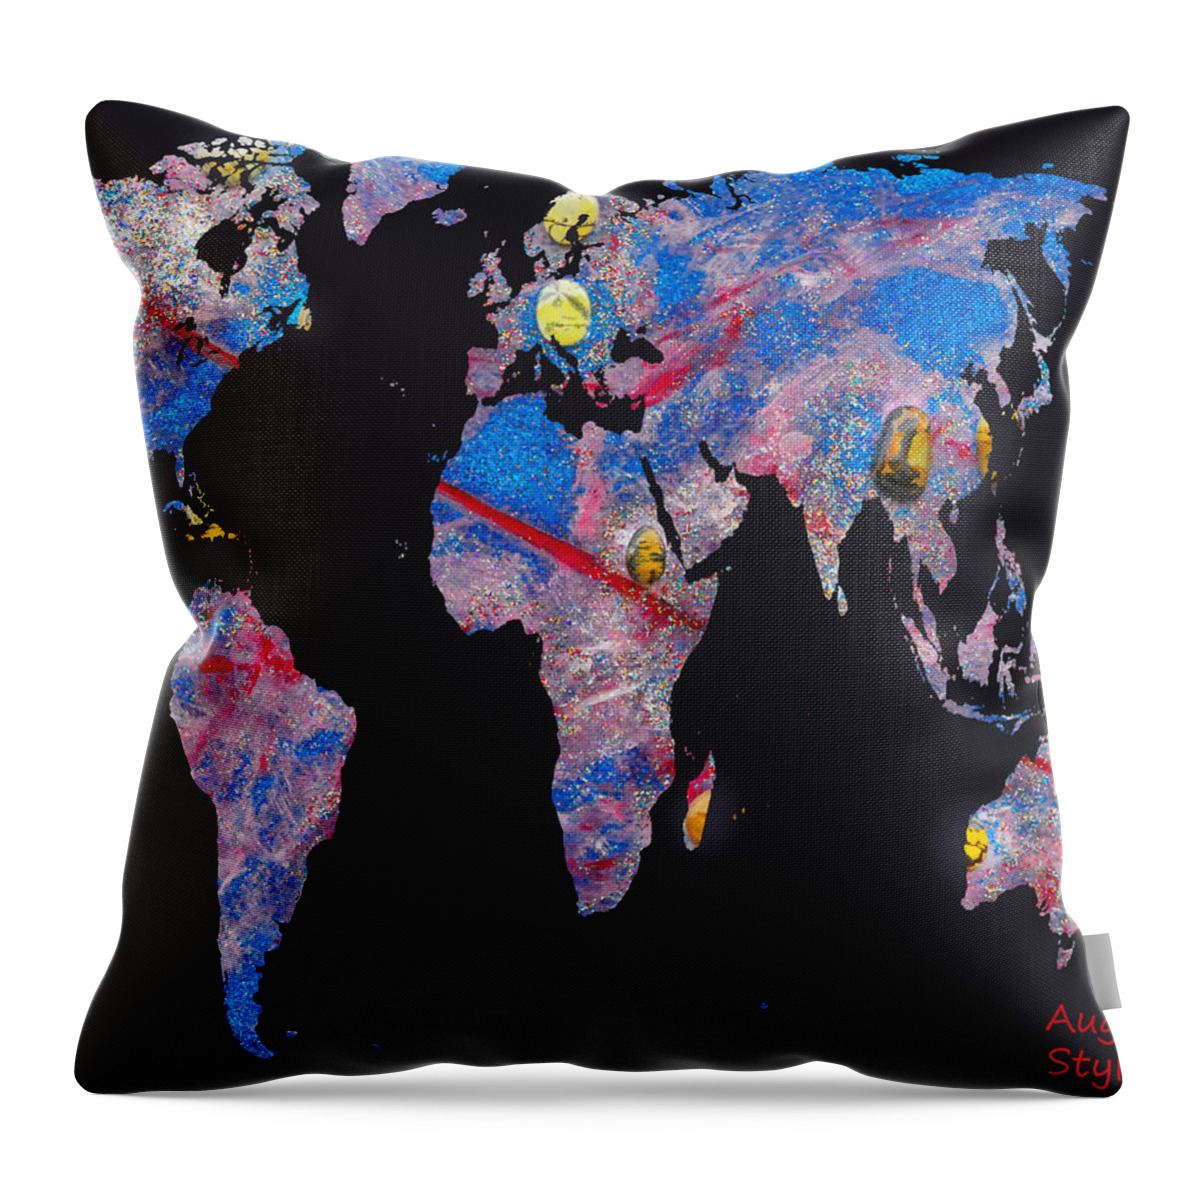 Augusta Stylianou Throw Pillow featuring the digital art World Map and Aries Constellation by Augusta Stylianou